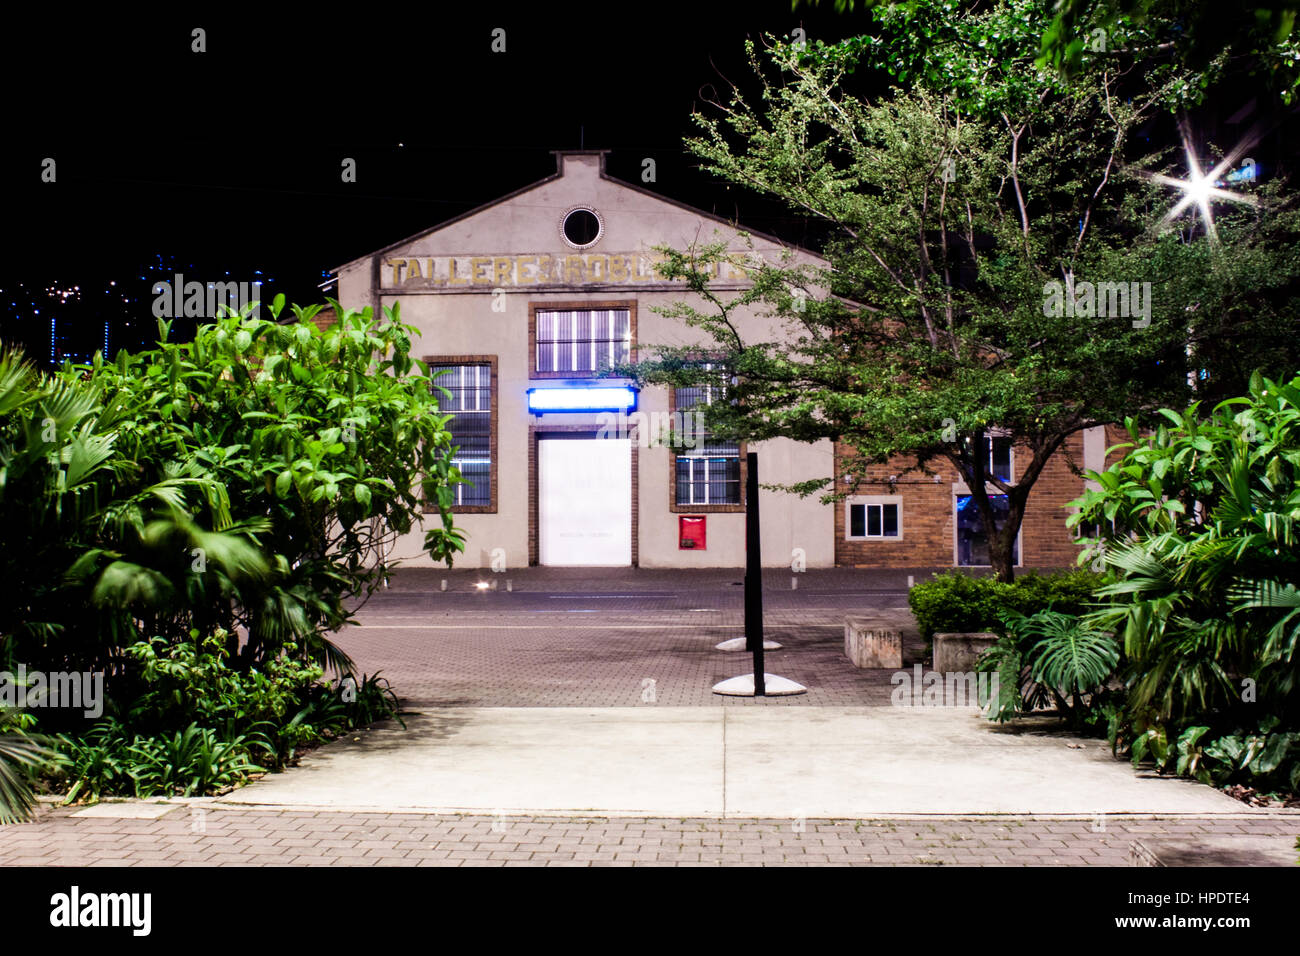 a night view of museum of modern art (MAMM) in Medellín, Colombia Stock Photo